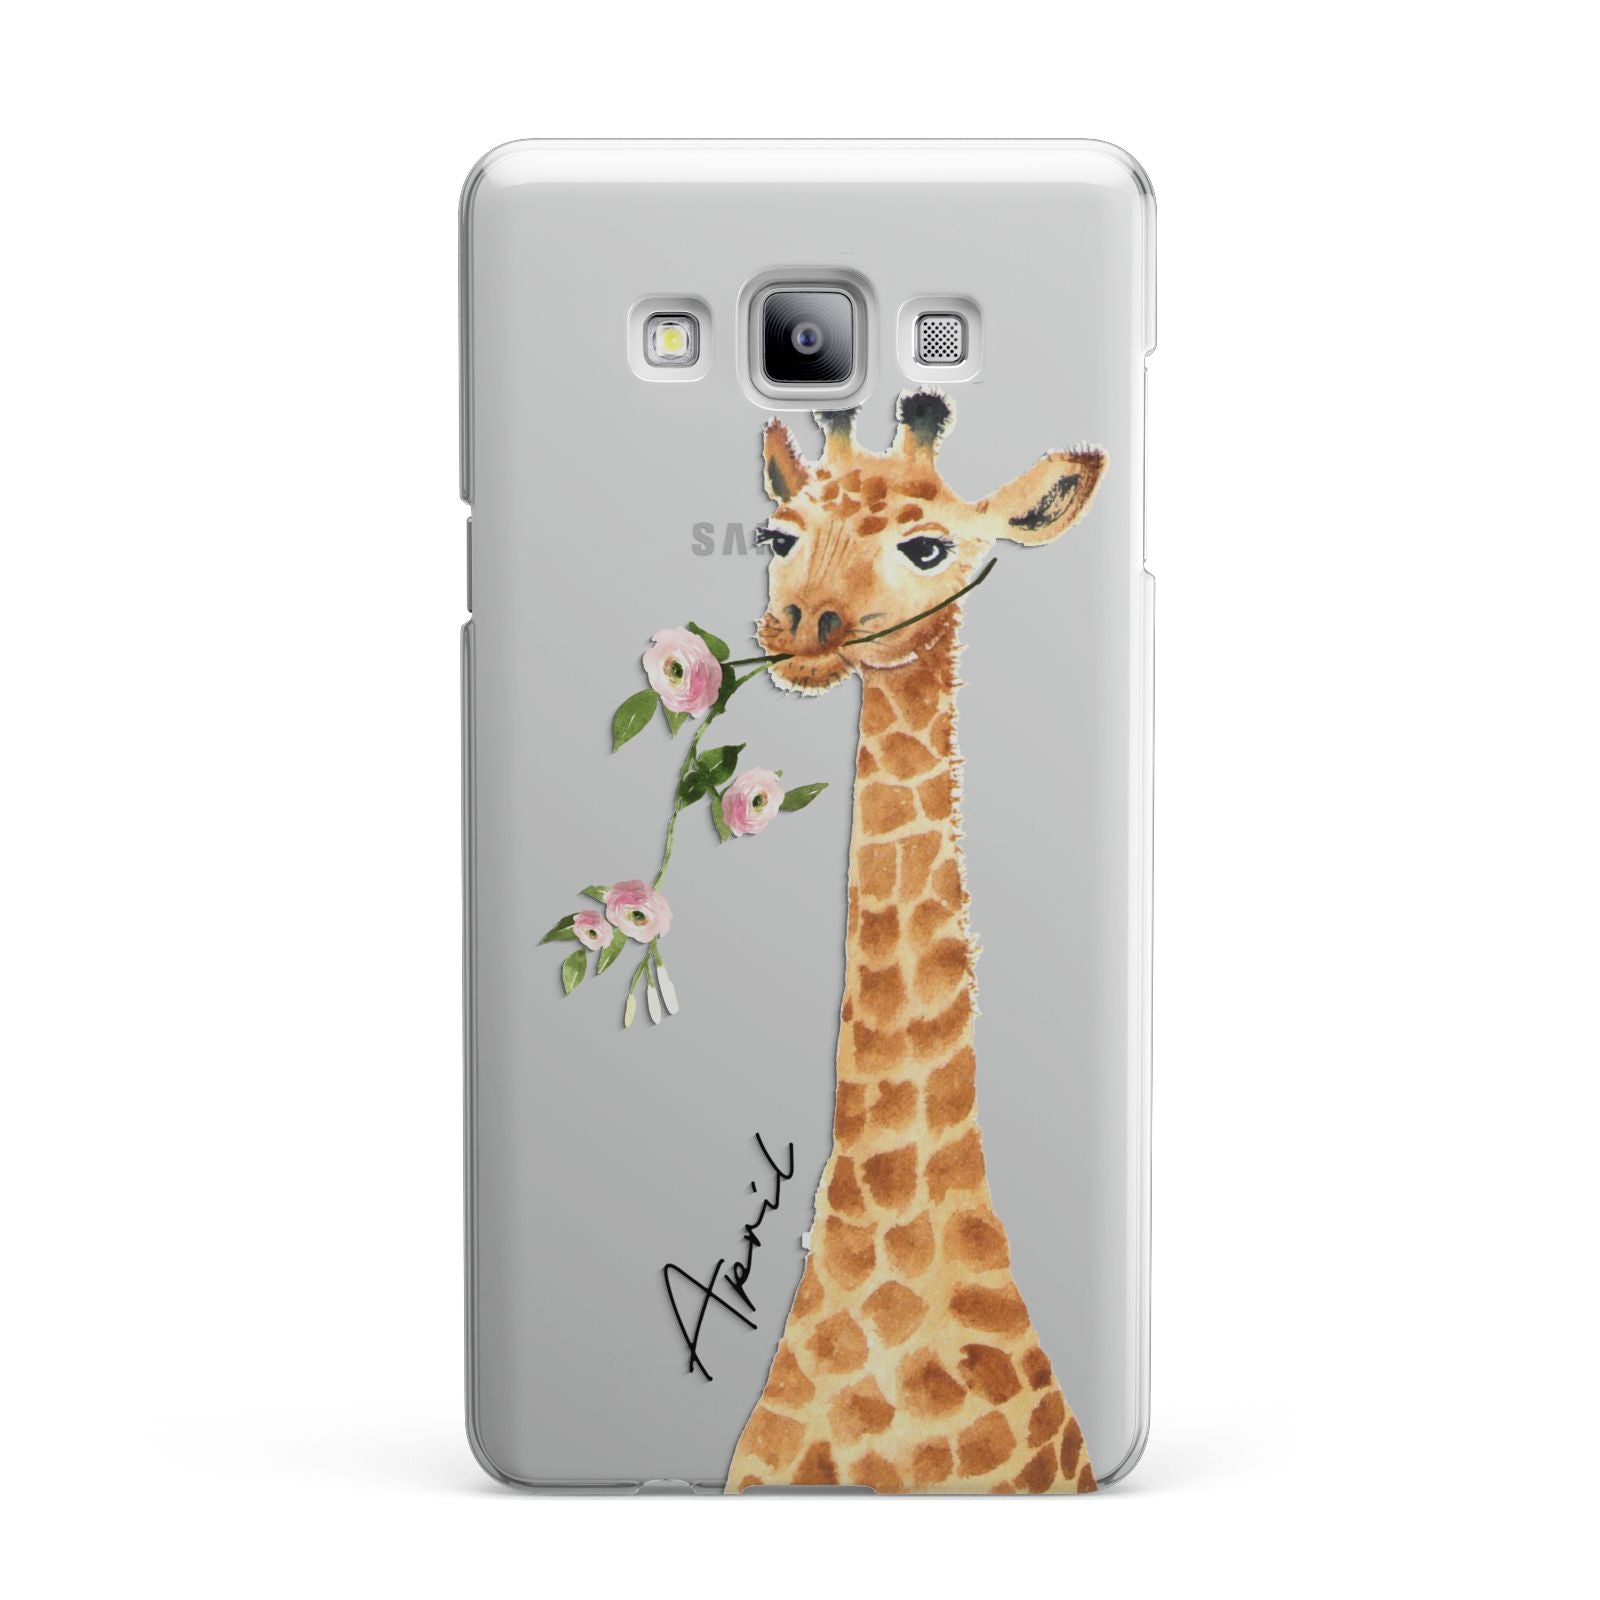 Personalised Giraffe with Name Samsung Galaxy A7 2015 Case